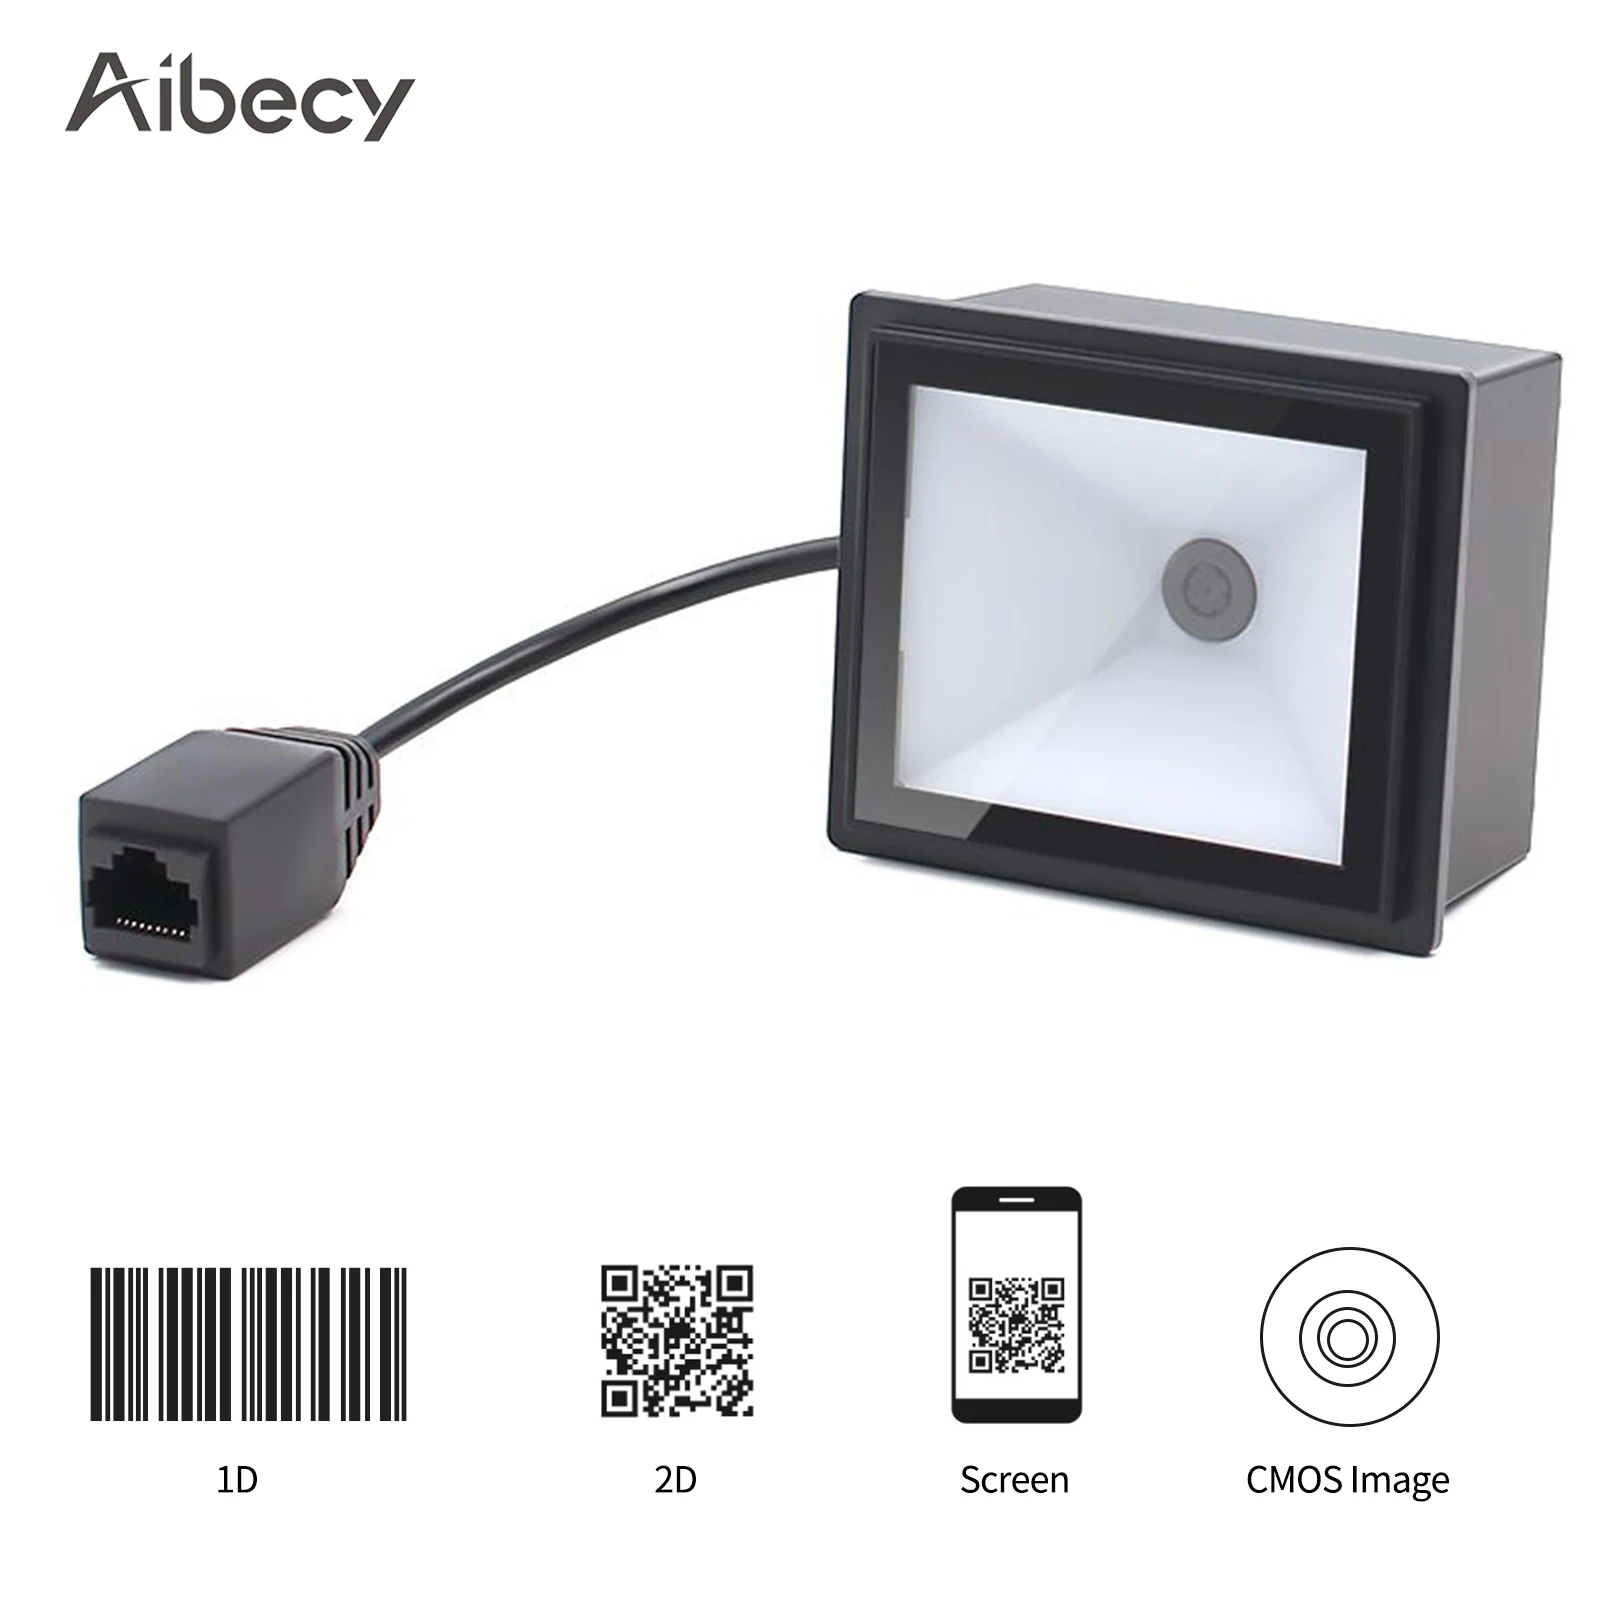 

Aibecy Embedded 1D 2D QR Barcode Scanner Module CMOS Image Auto-scan Wired Fixed Mount Bar Code Reader Support Screen Scan